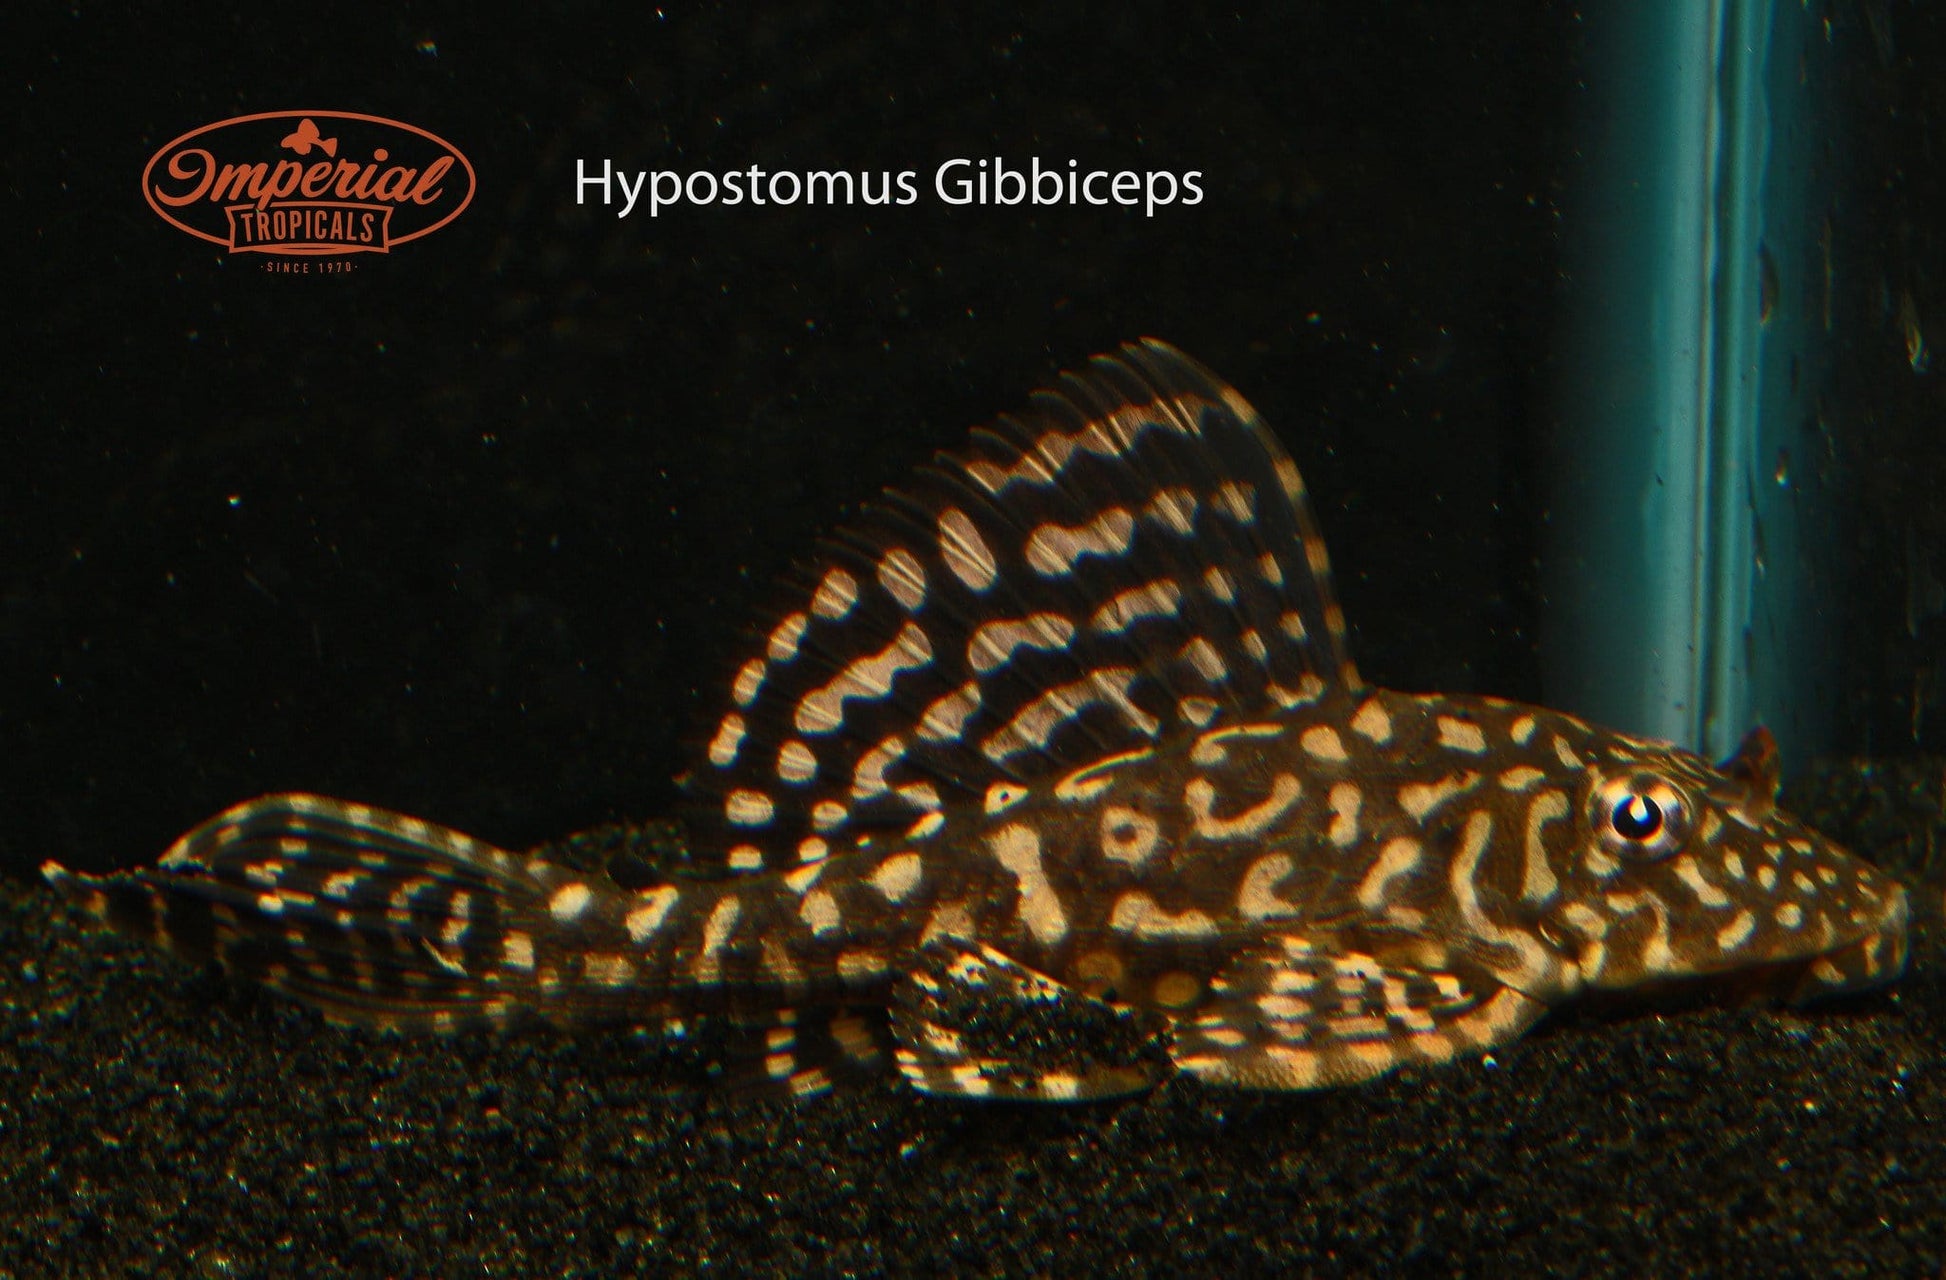 Spotted Sailfin Pleco (Pterygoplichthys joselimaianus) - Imperial Tropicals